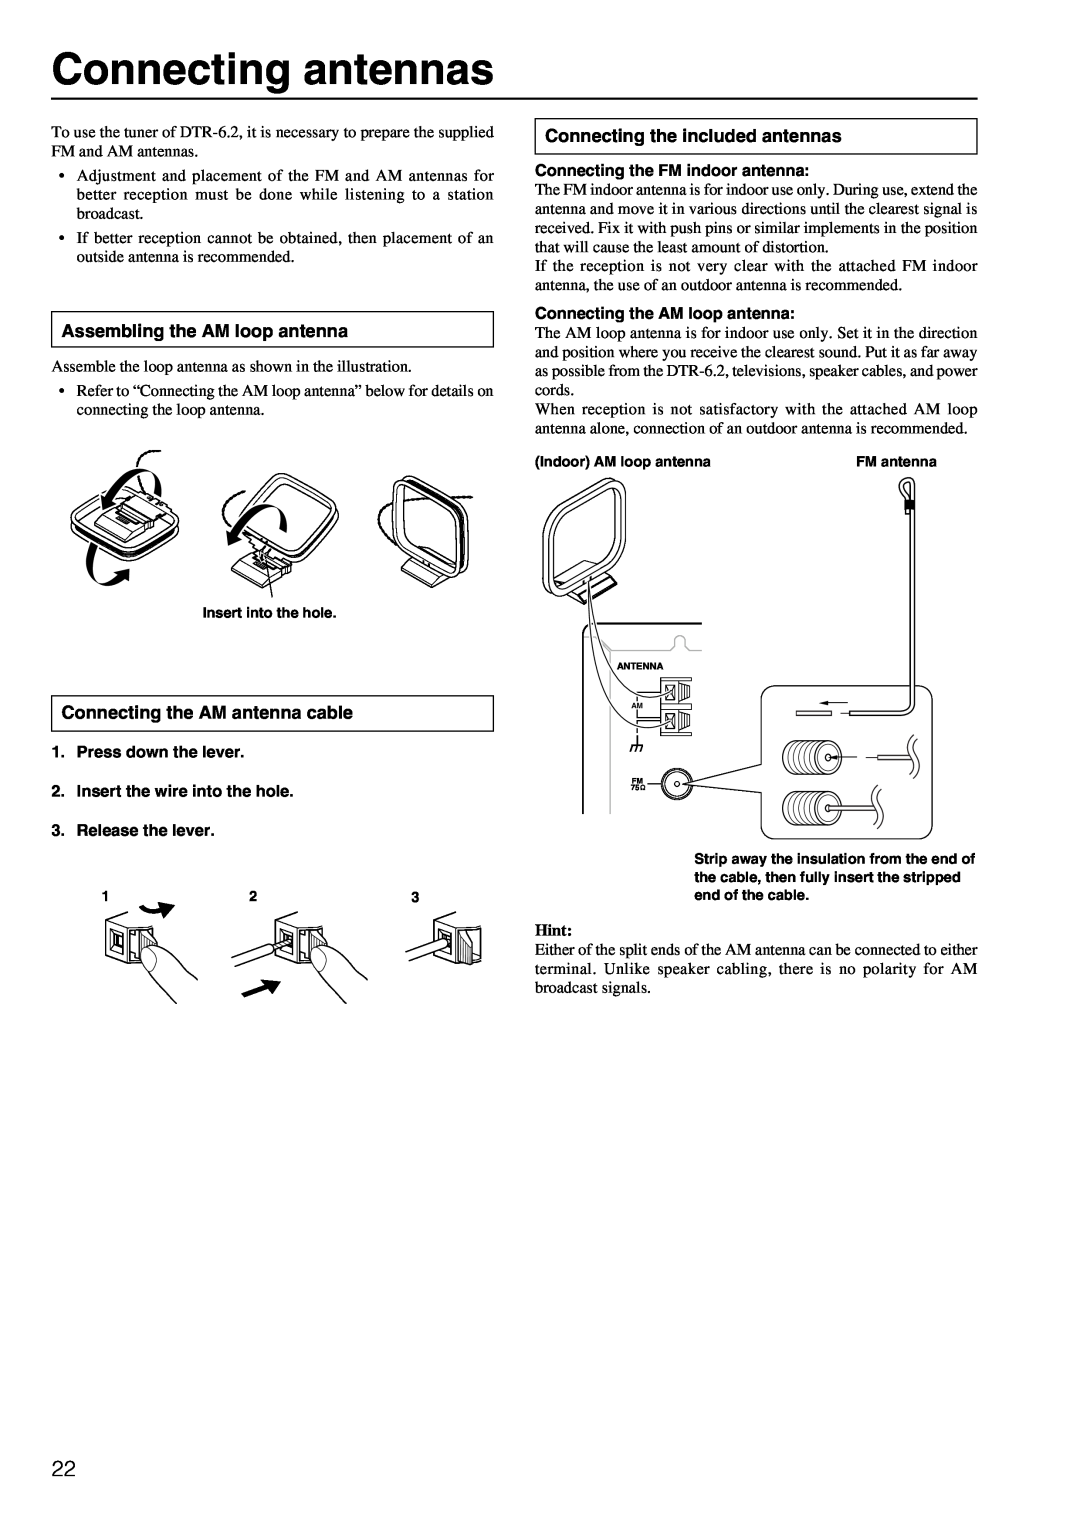 Integra DTR-6.2 instruction manual Connecting antennas, Assembling the AM loop antenna, Connecting the AM antenna cable 